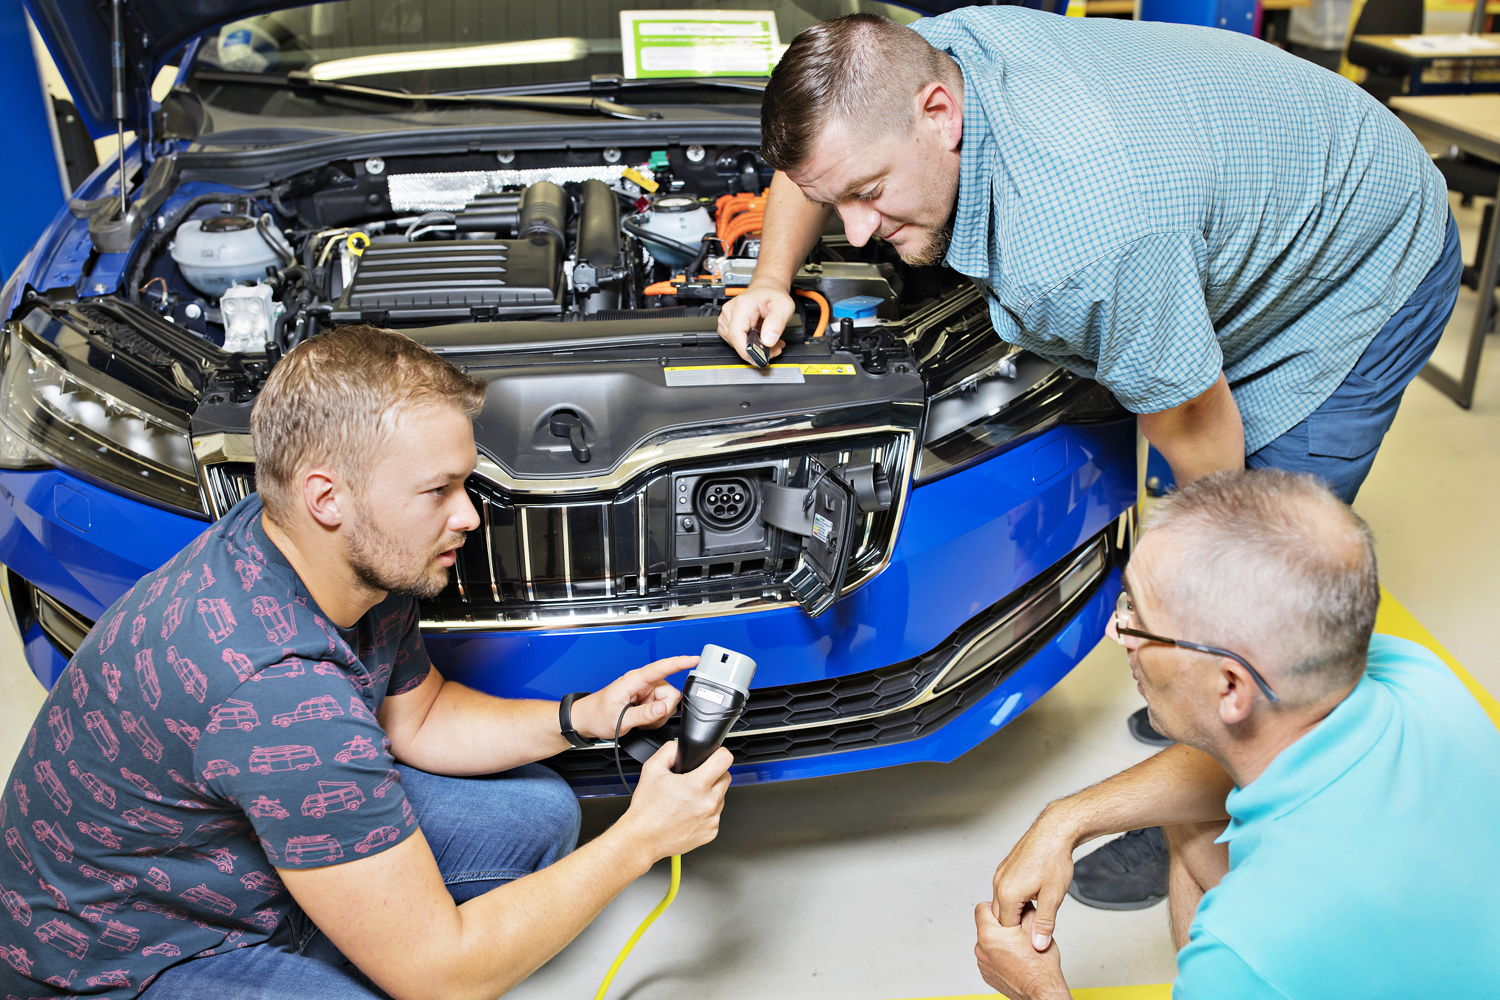 Since the training programmes began in May 2016, more
than 12,000 ŠKODA employees have successfully
completed the special courses.